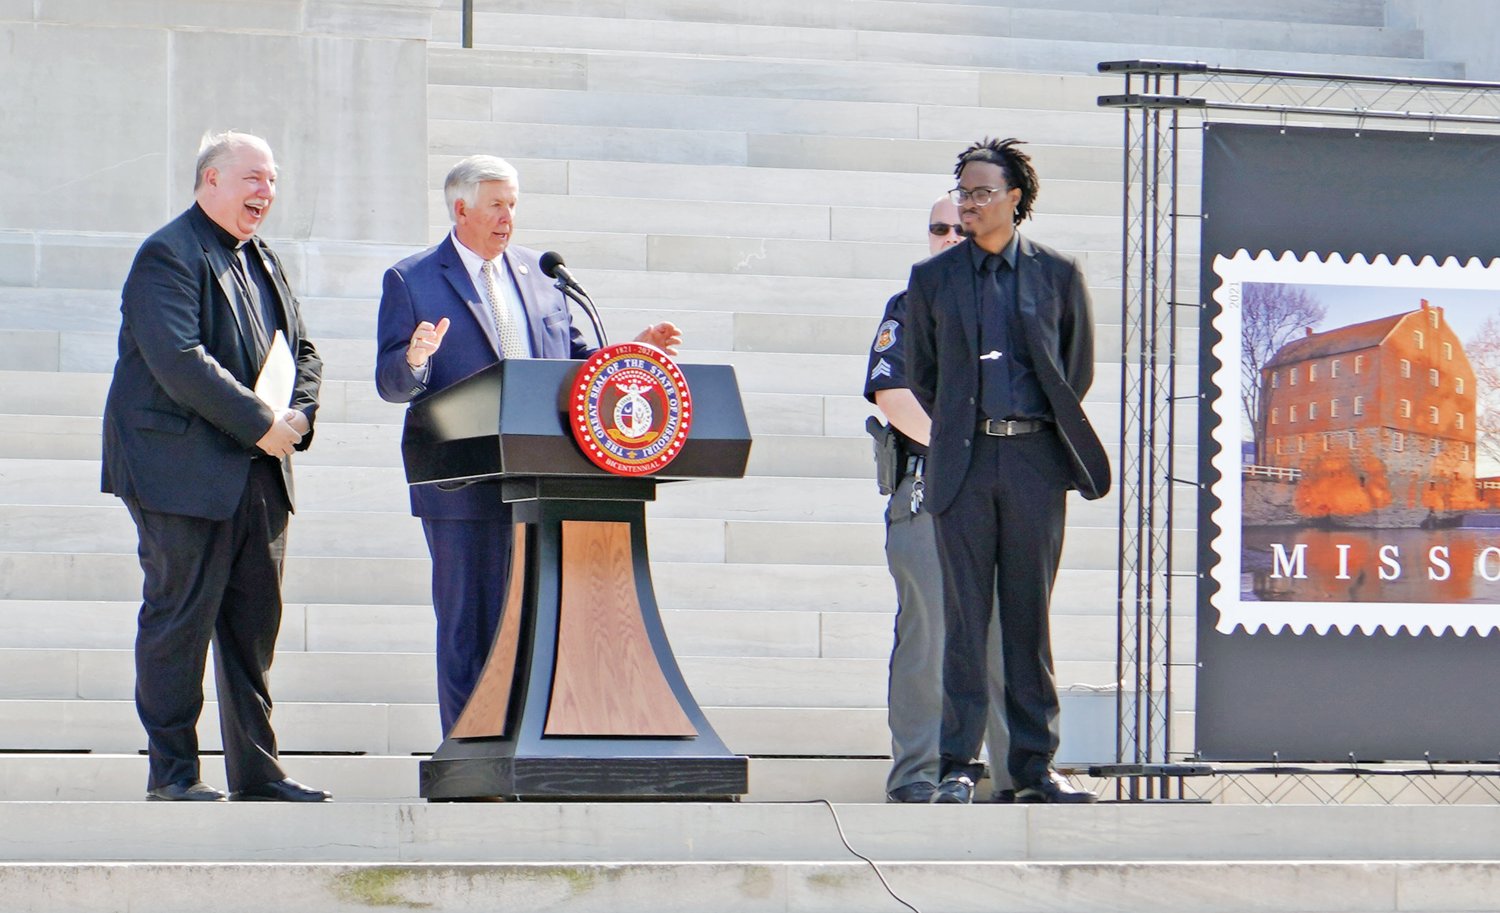 Monsignor Robert A. Kurwicki, vicar general of the Jefferson City diocese and chaplain of the Missouri House of Representatives, joins Gov. Mike Parson and Missouri State University Adjunct Professor James T. Gibson on the steps of the Capitol during the Aug. 10 Statehood Day celebration marking Missouri’s 200th anniversary as the 24th state in the Union.